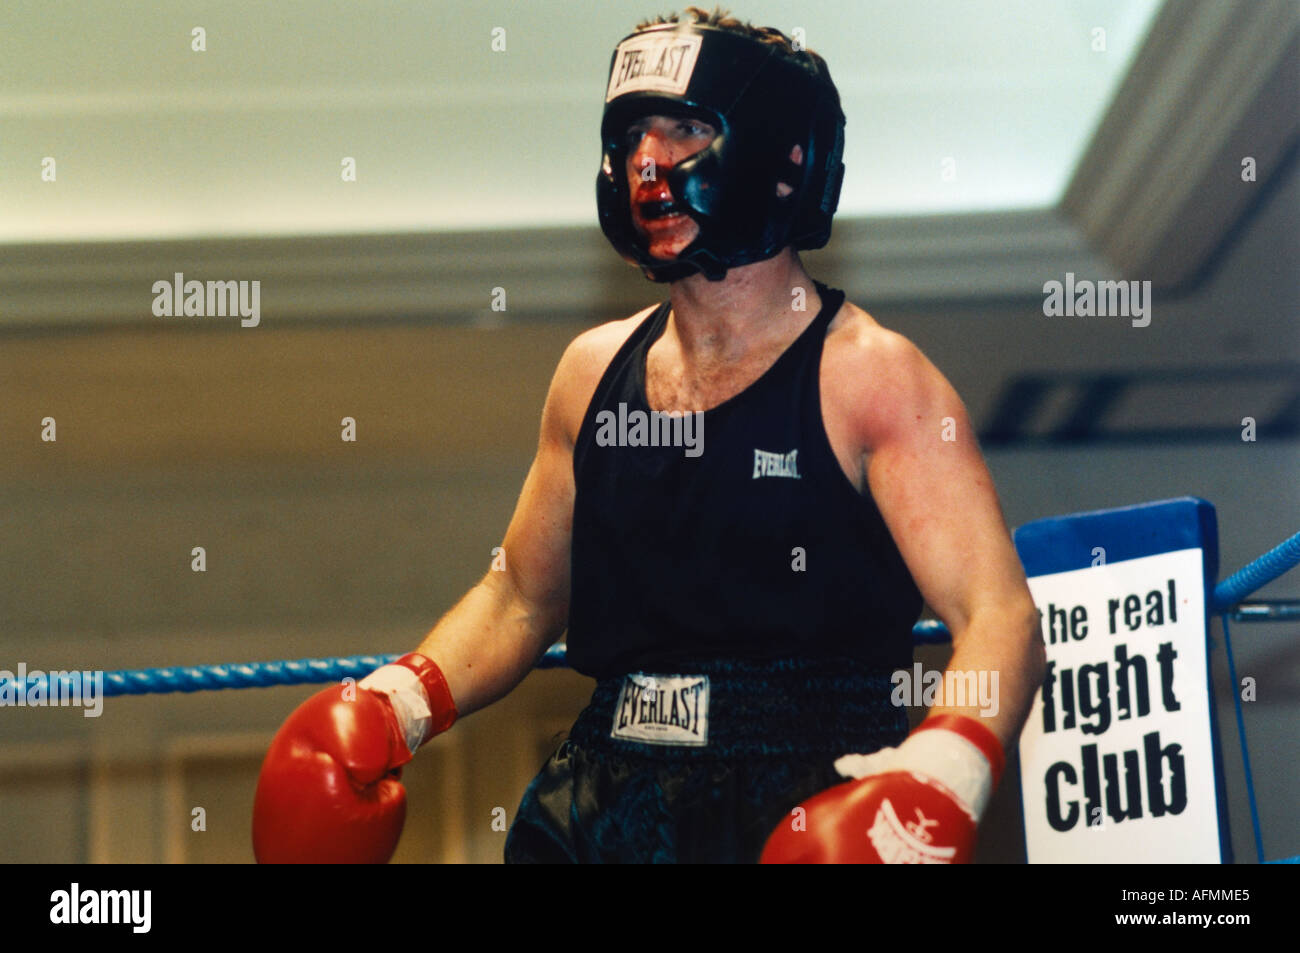 The Real Fightclub Participants of the high adrenaline contact sport of white collar boxing Stock Photo